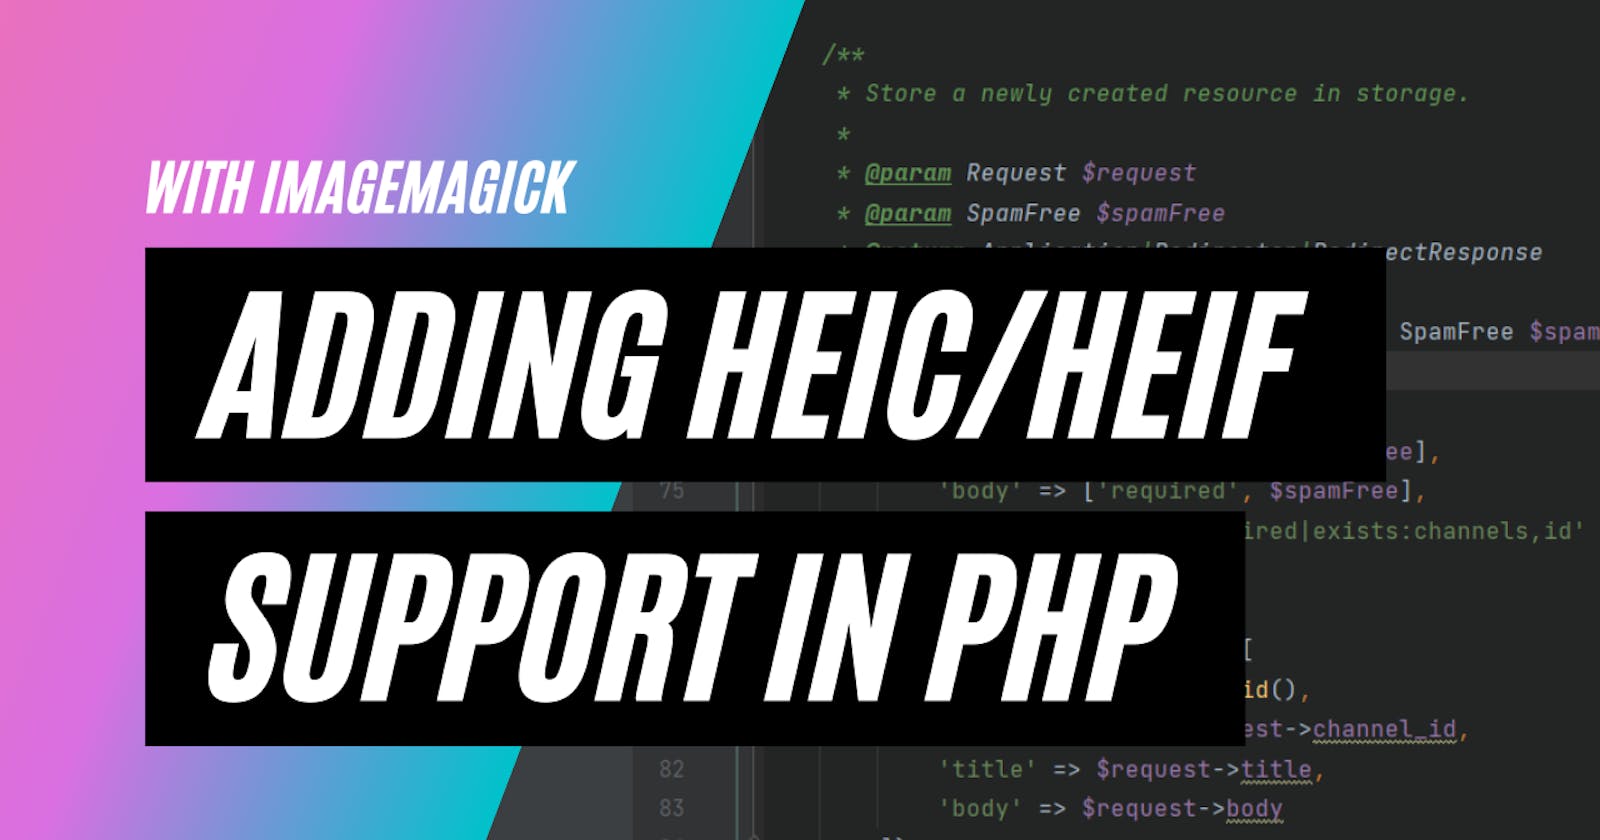 How to add support for HEIC images with ImageMagick in PHP